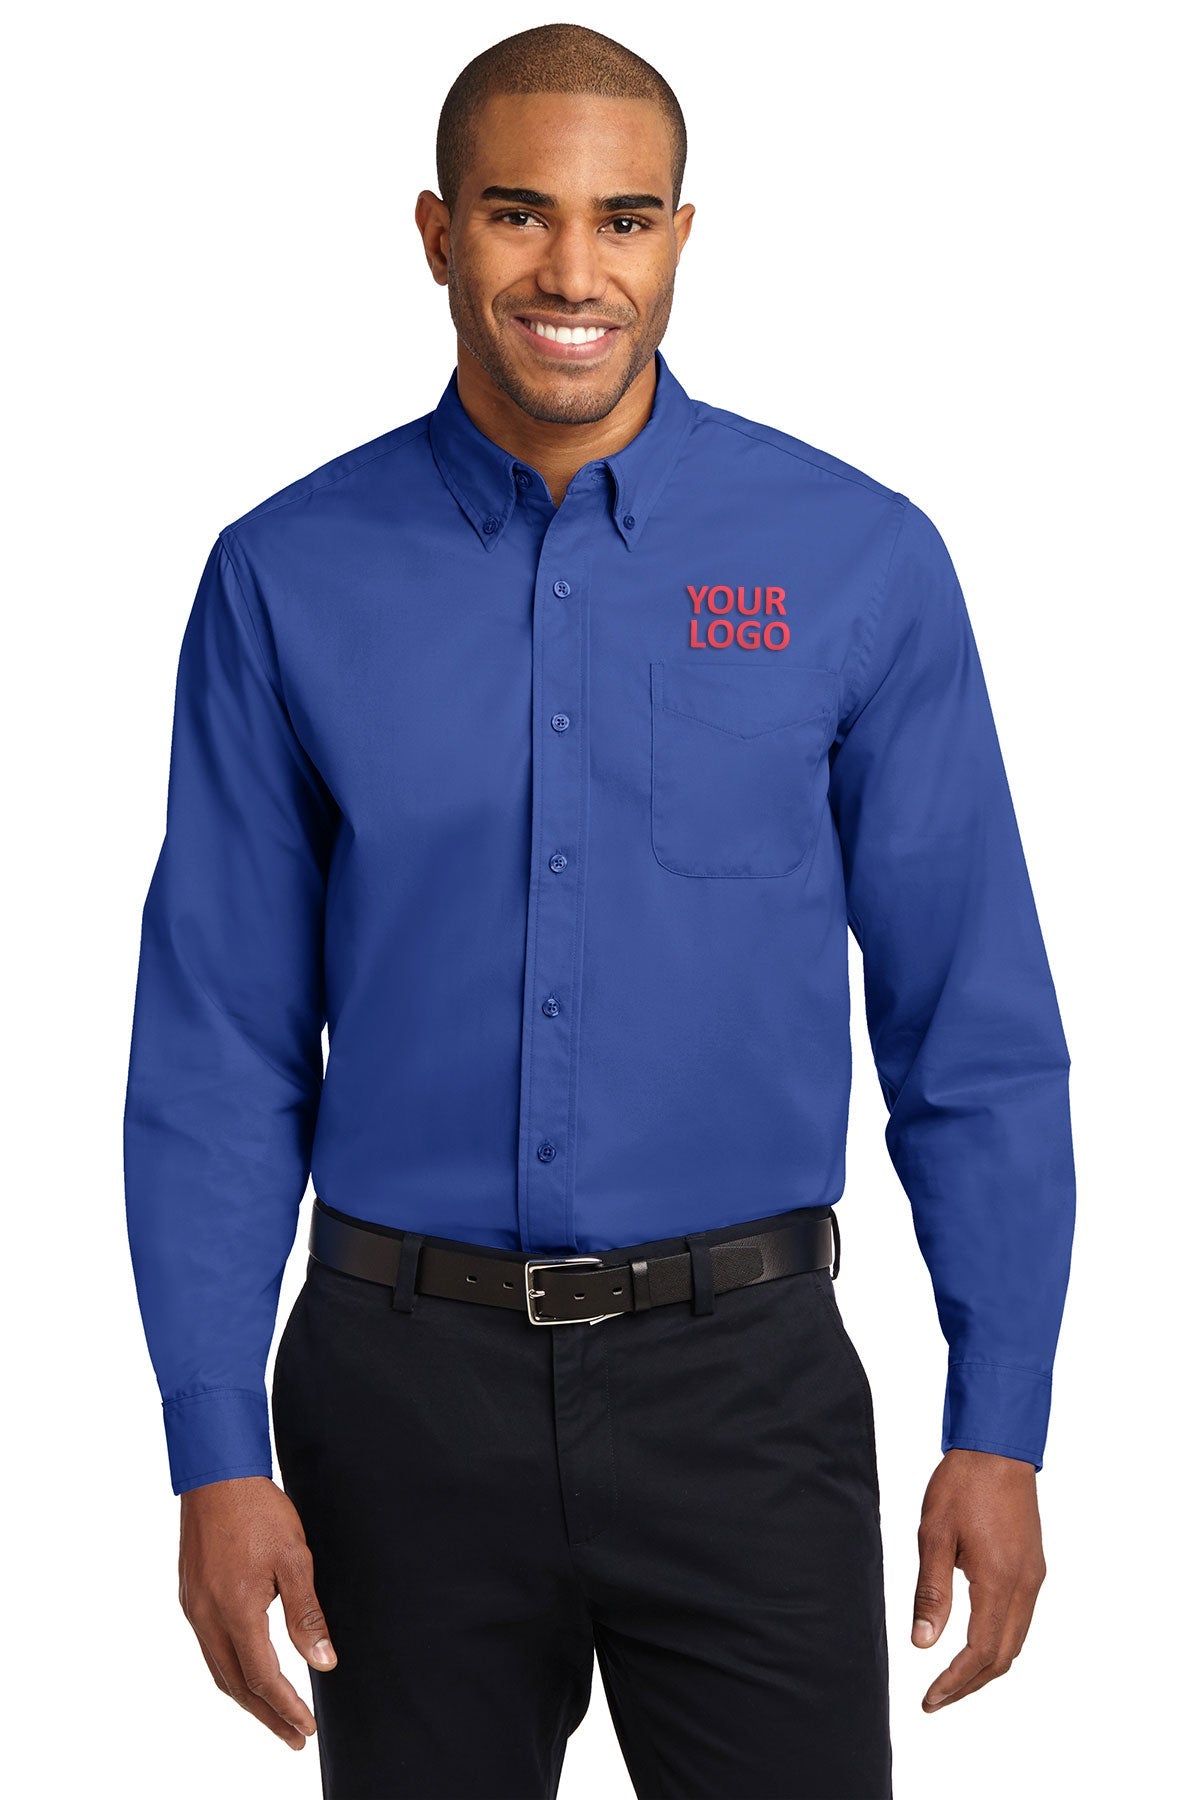 Port Authority Royal/ Classic Navy S608ES business shirts with company logo